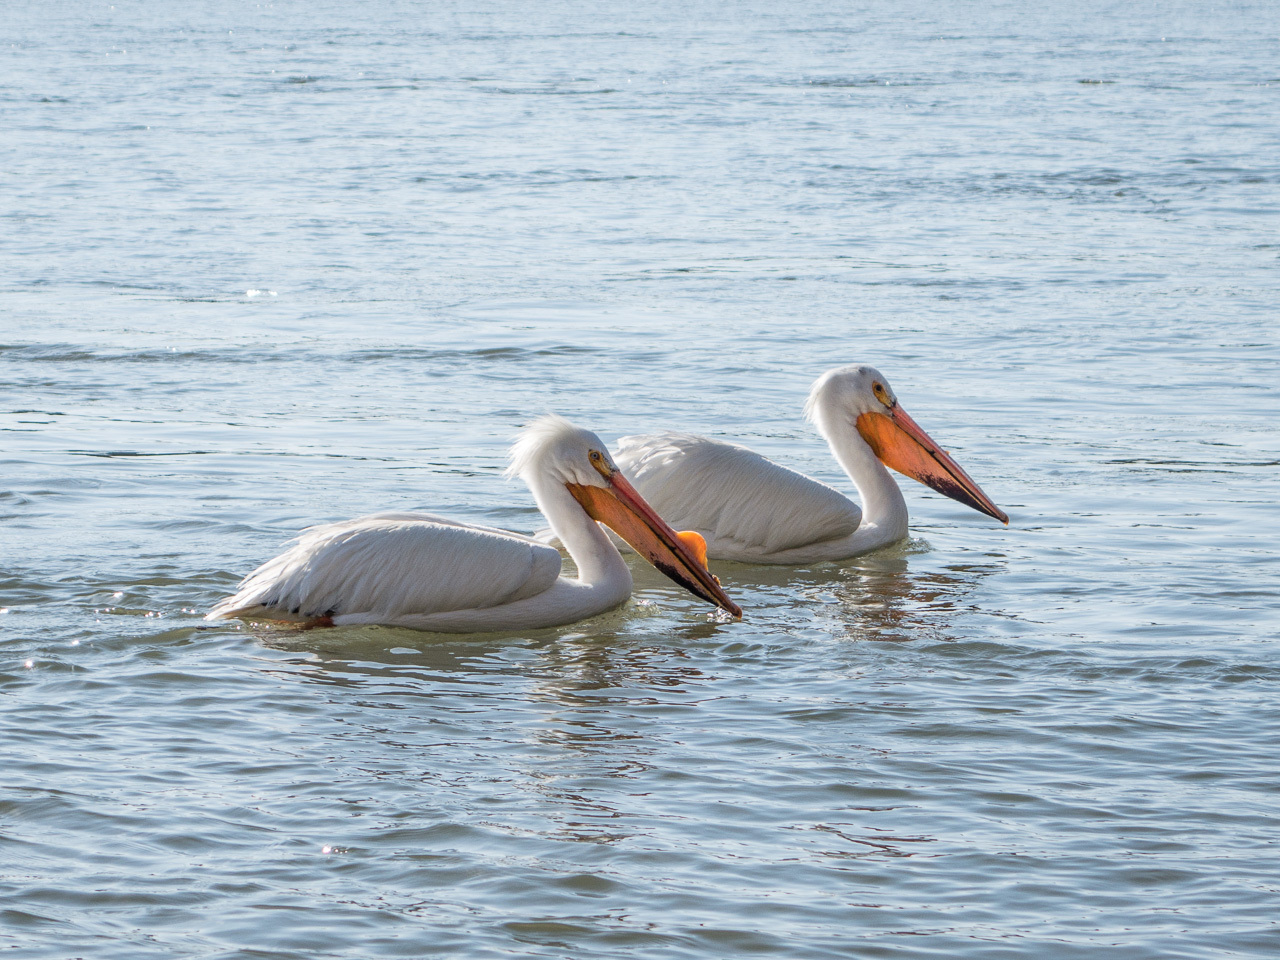 pelicans on the river